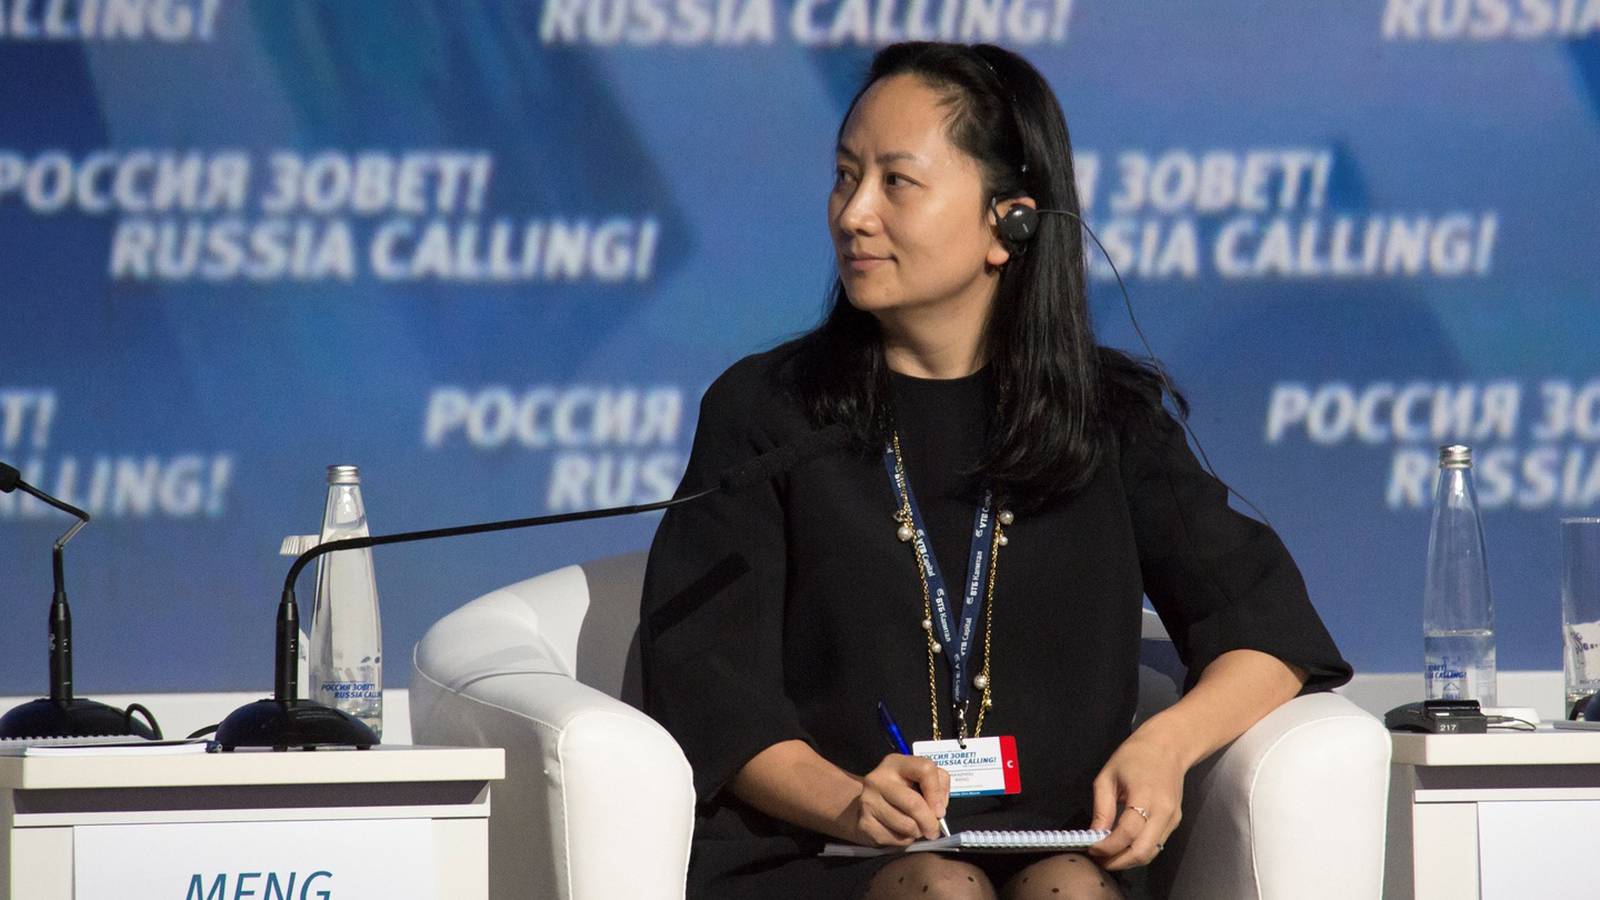 Huawei Cfo Loses High Court Bid For Access To Hsbc Records The Irish Times 